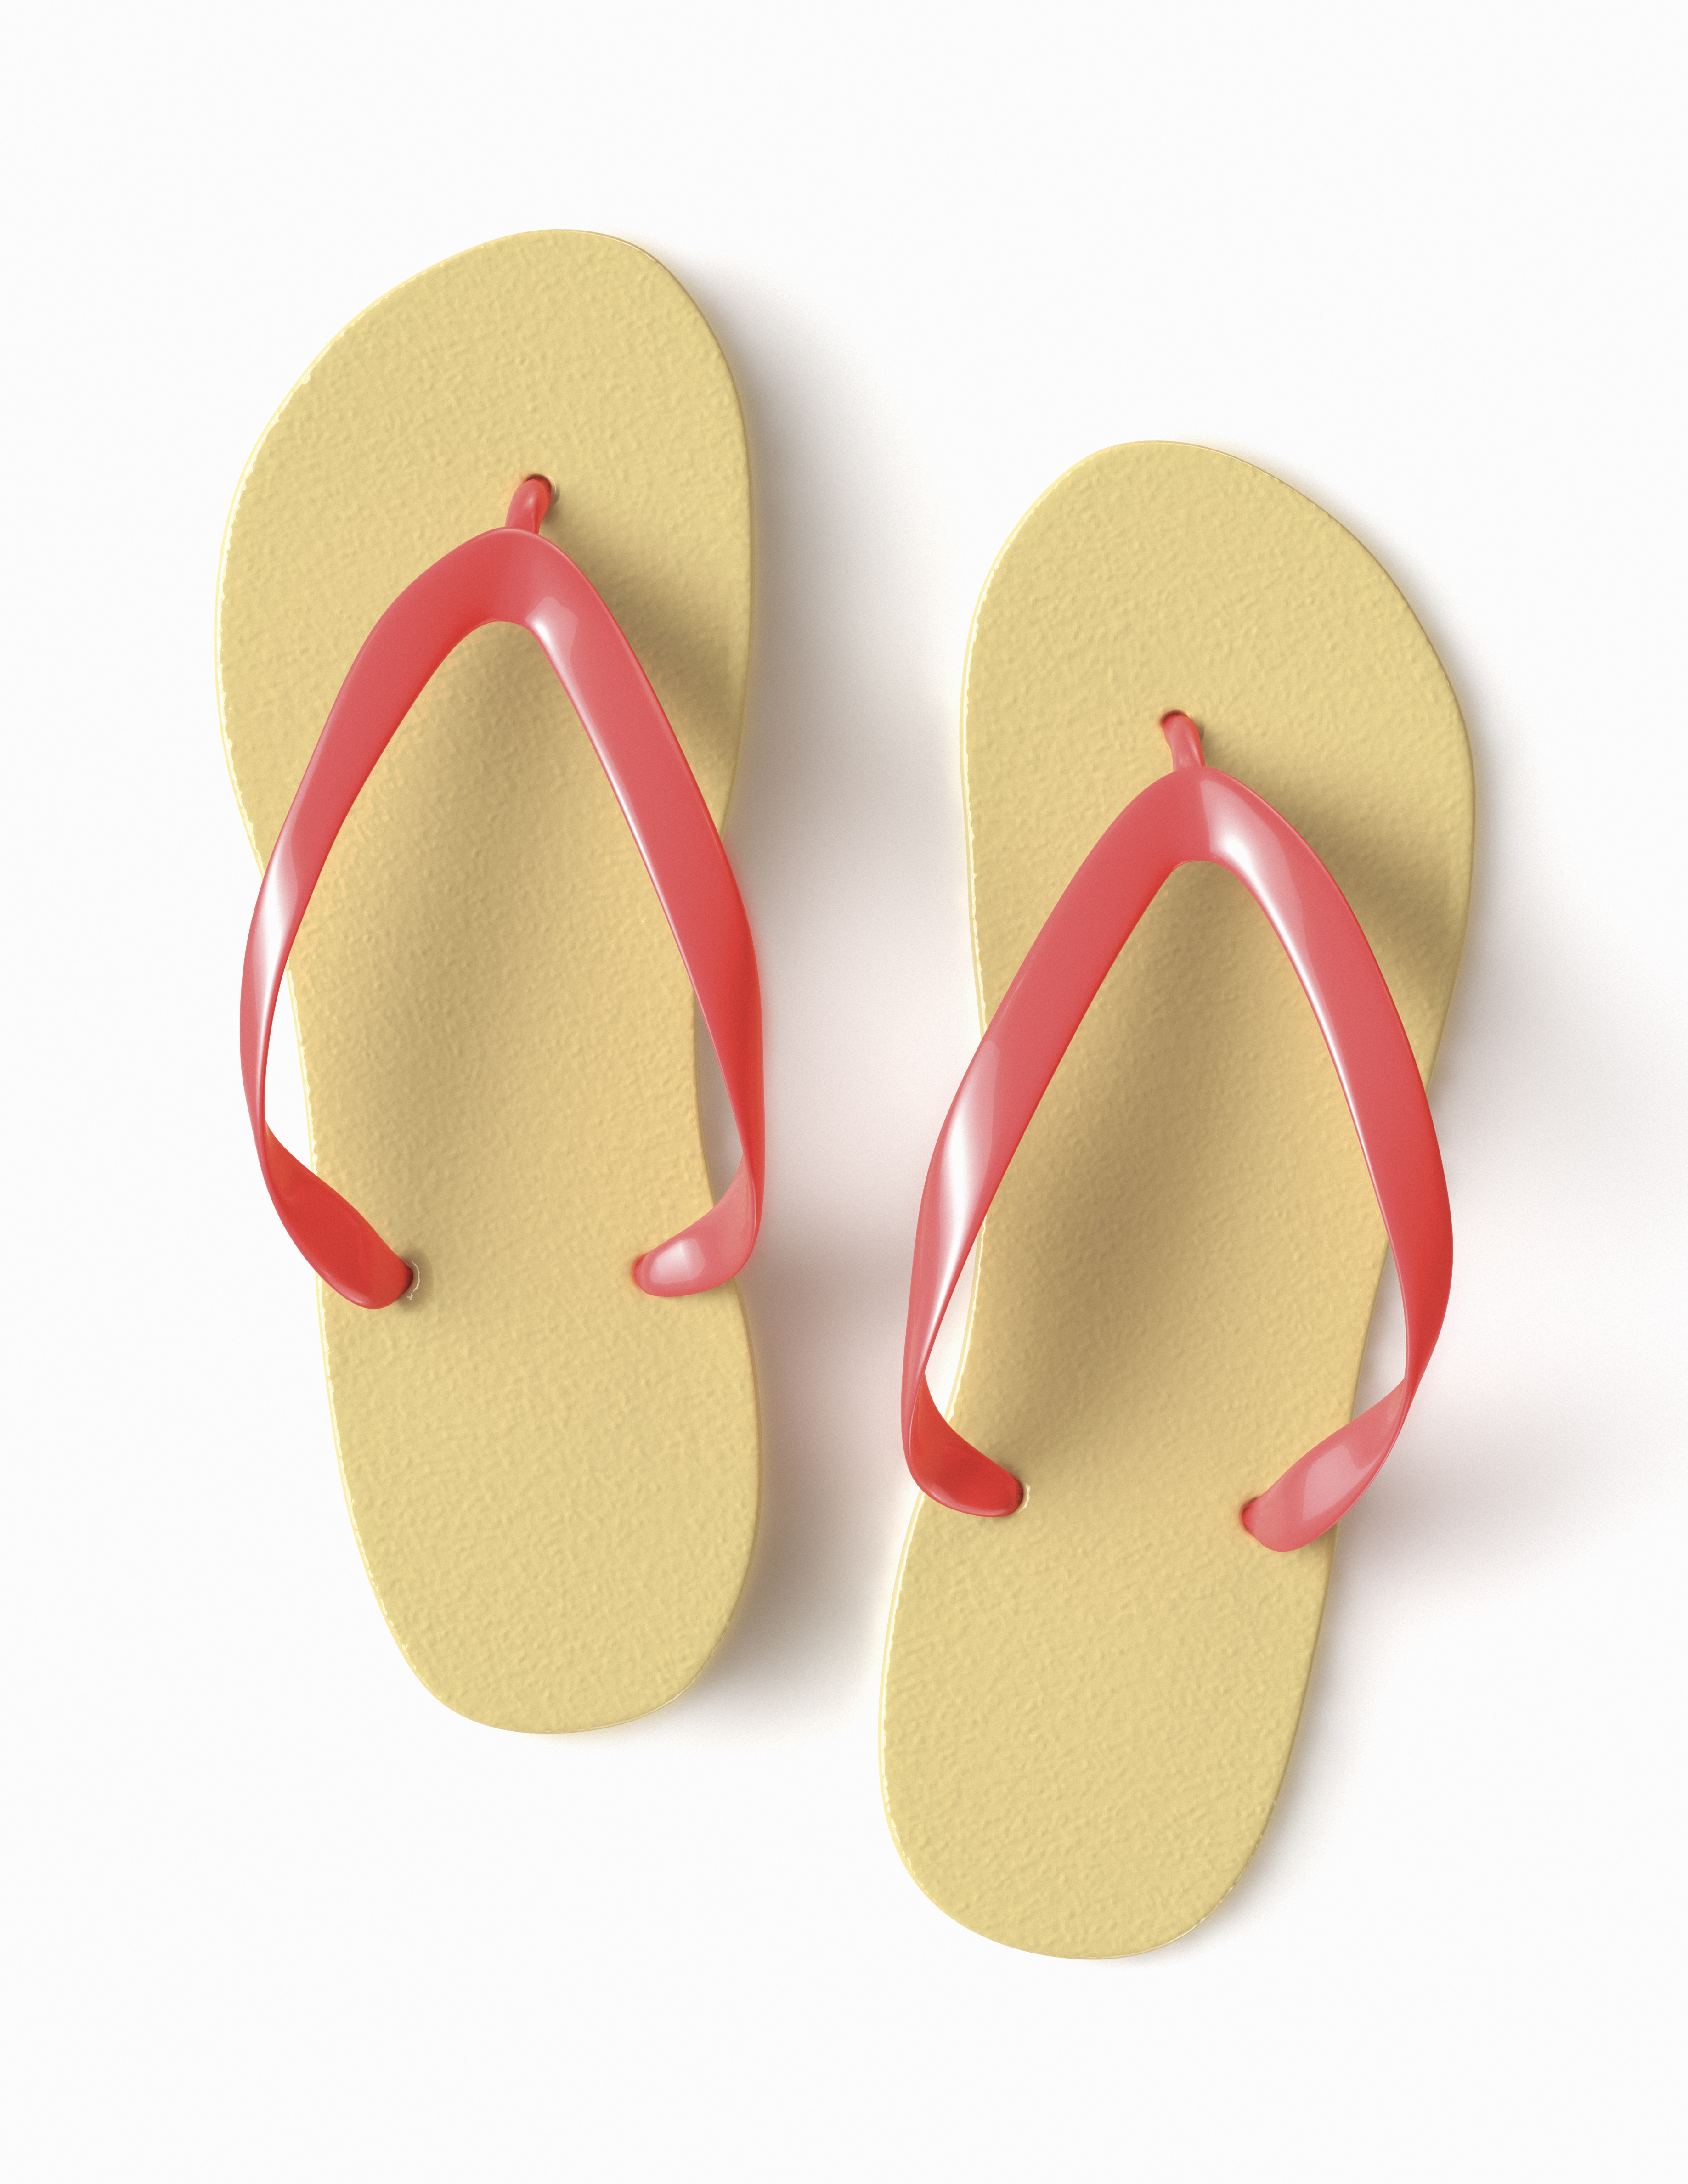 What Color Are These Flip Flops, PHOTO 